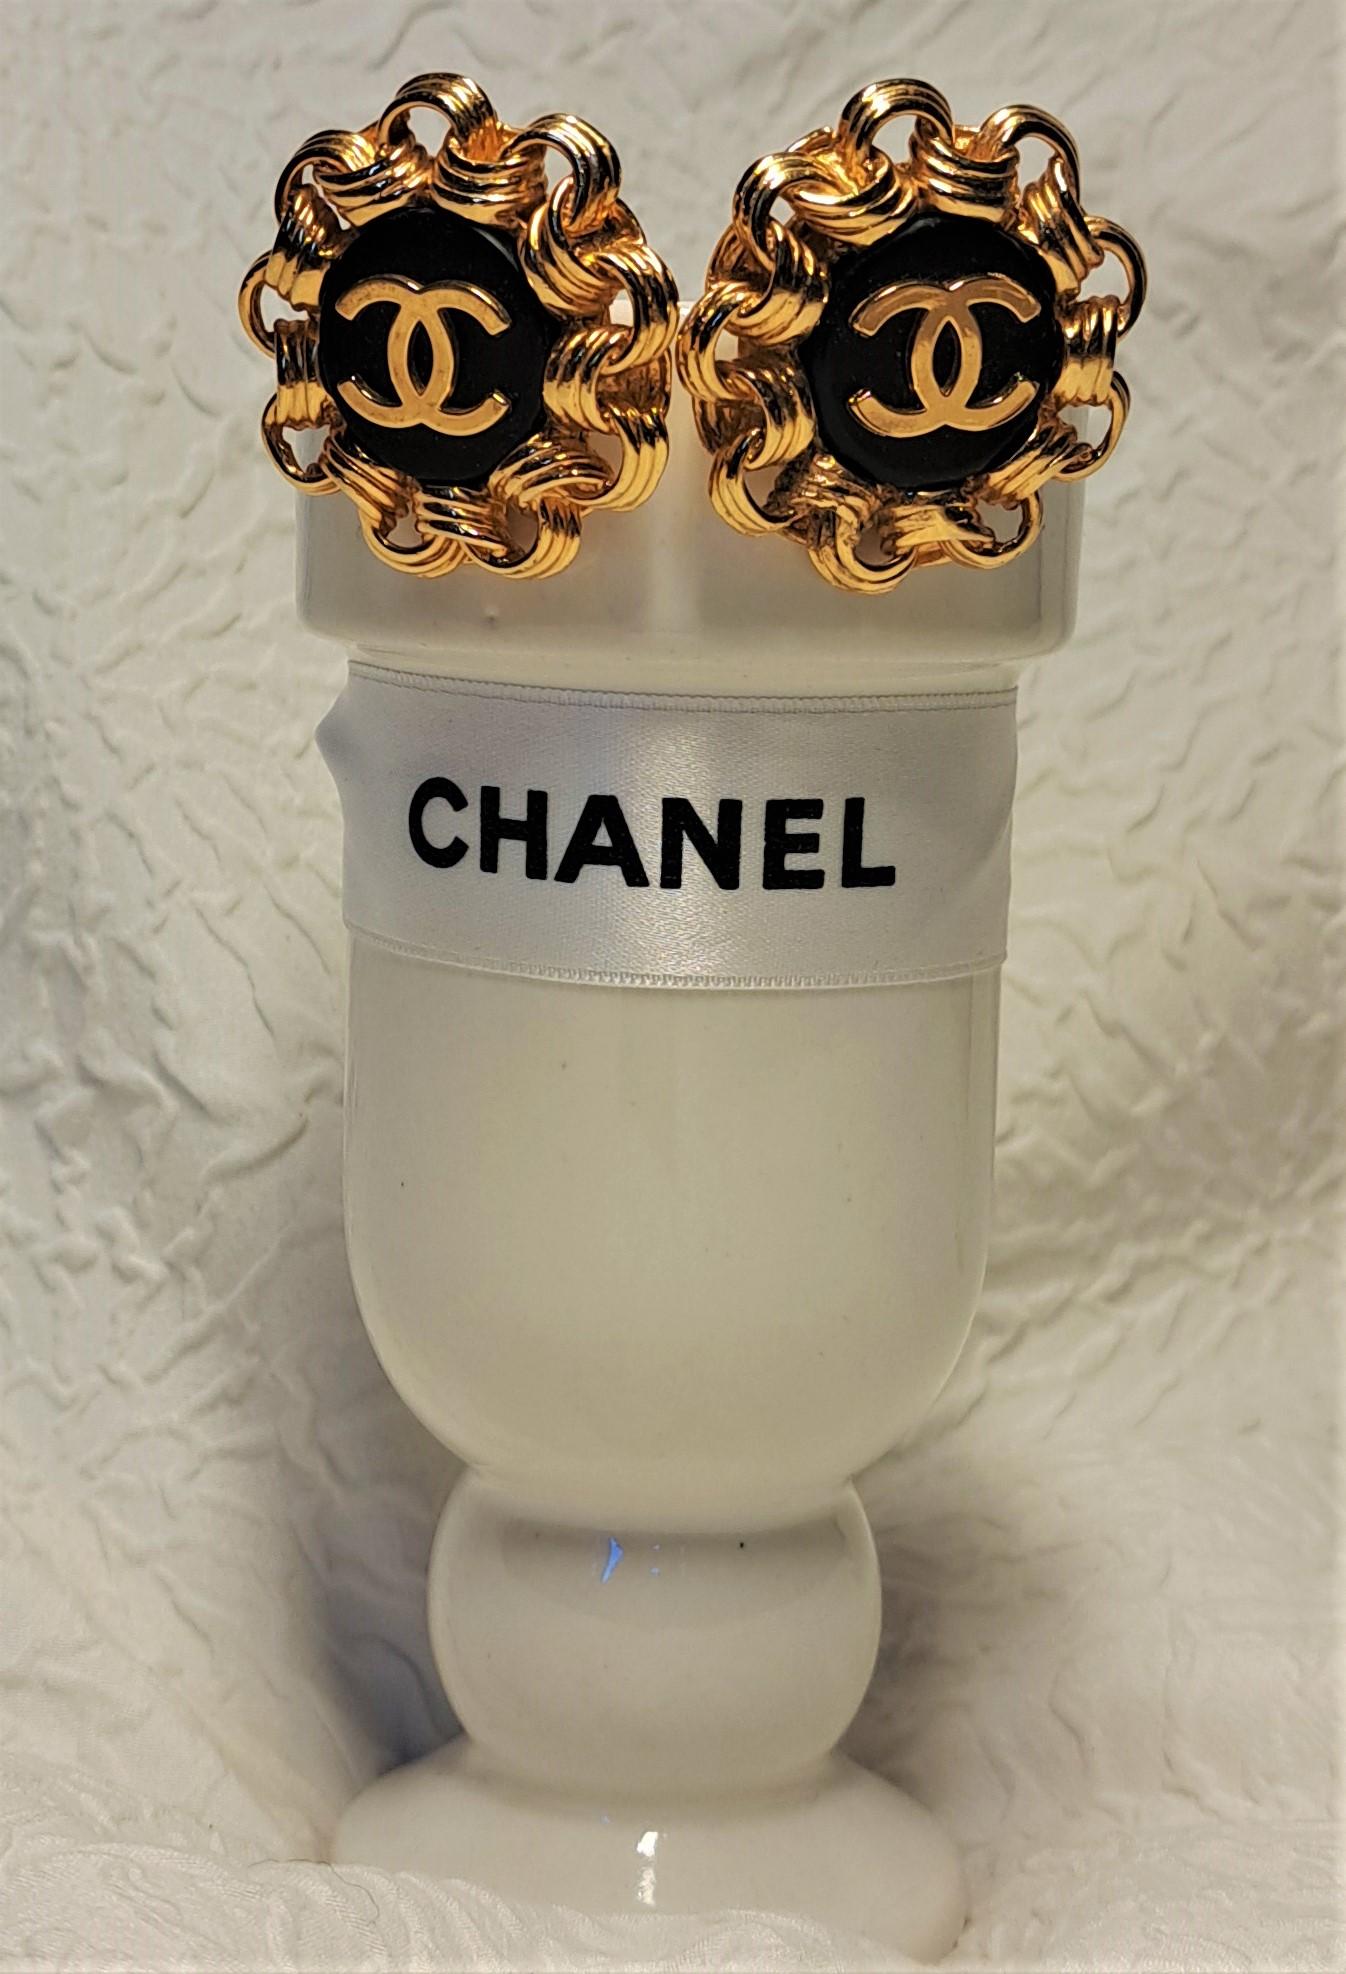 These exceptional vintage 1993 Chanel jumbo oversized clip-on earrings (pair) in gold with black and logo CC are a highly sought-after fashion accessory. These earrings were originally created by the fashion house Chanel and are characterized by